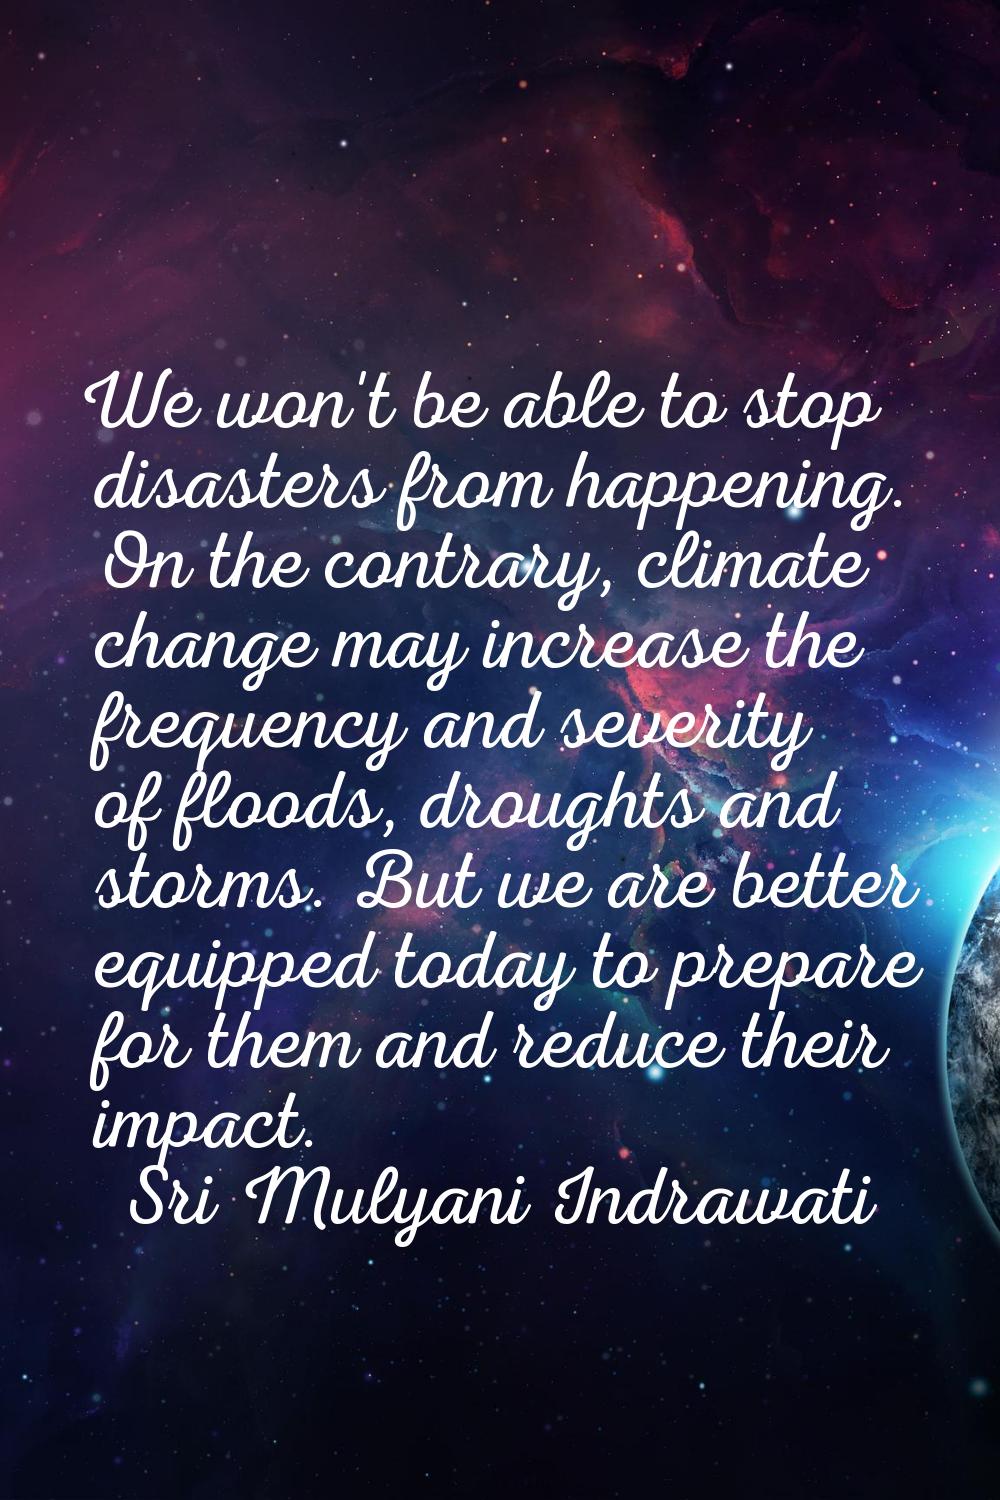 We won't be able to stop disasters from happening. On the contrary, climate change may increase the